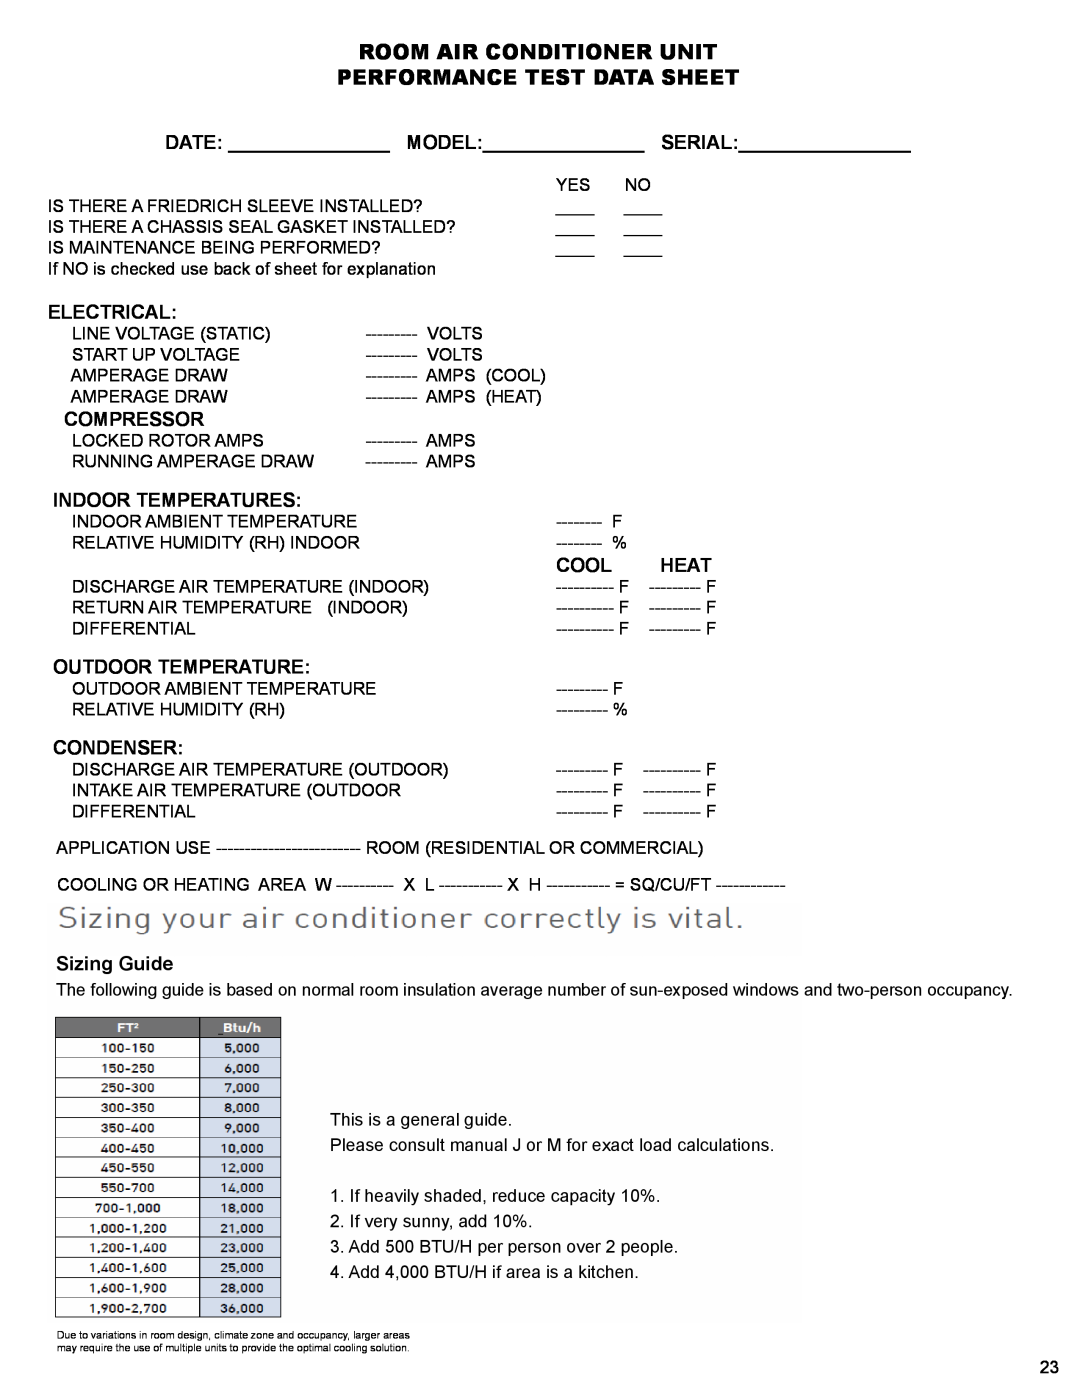 Friedrich R-410A service manual Room Air Conditioner Unit, Performance Test Data Sheet 